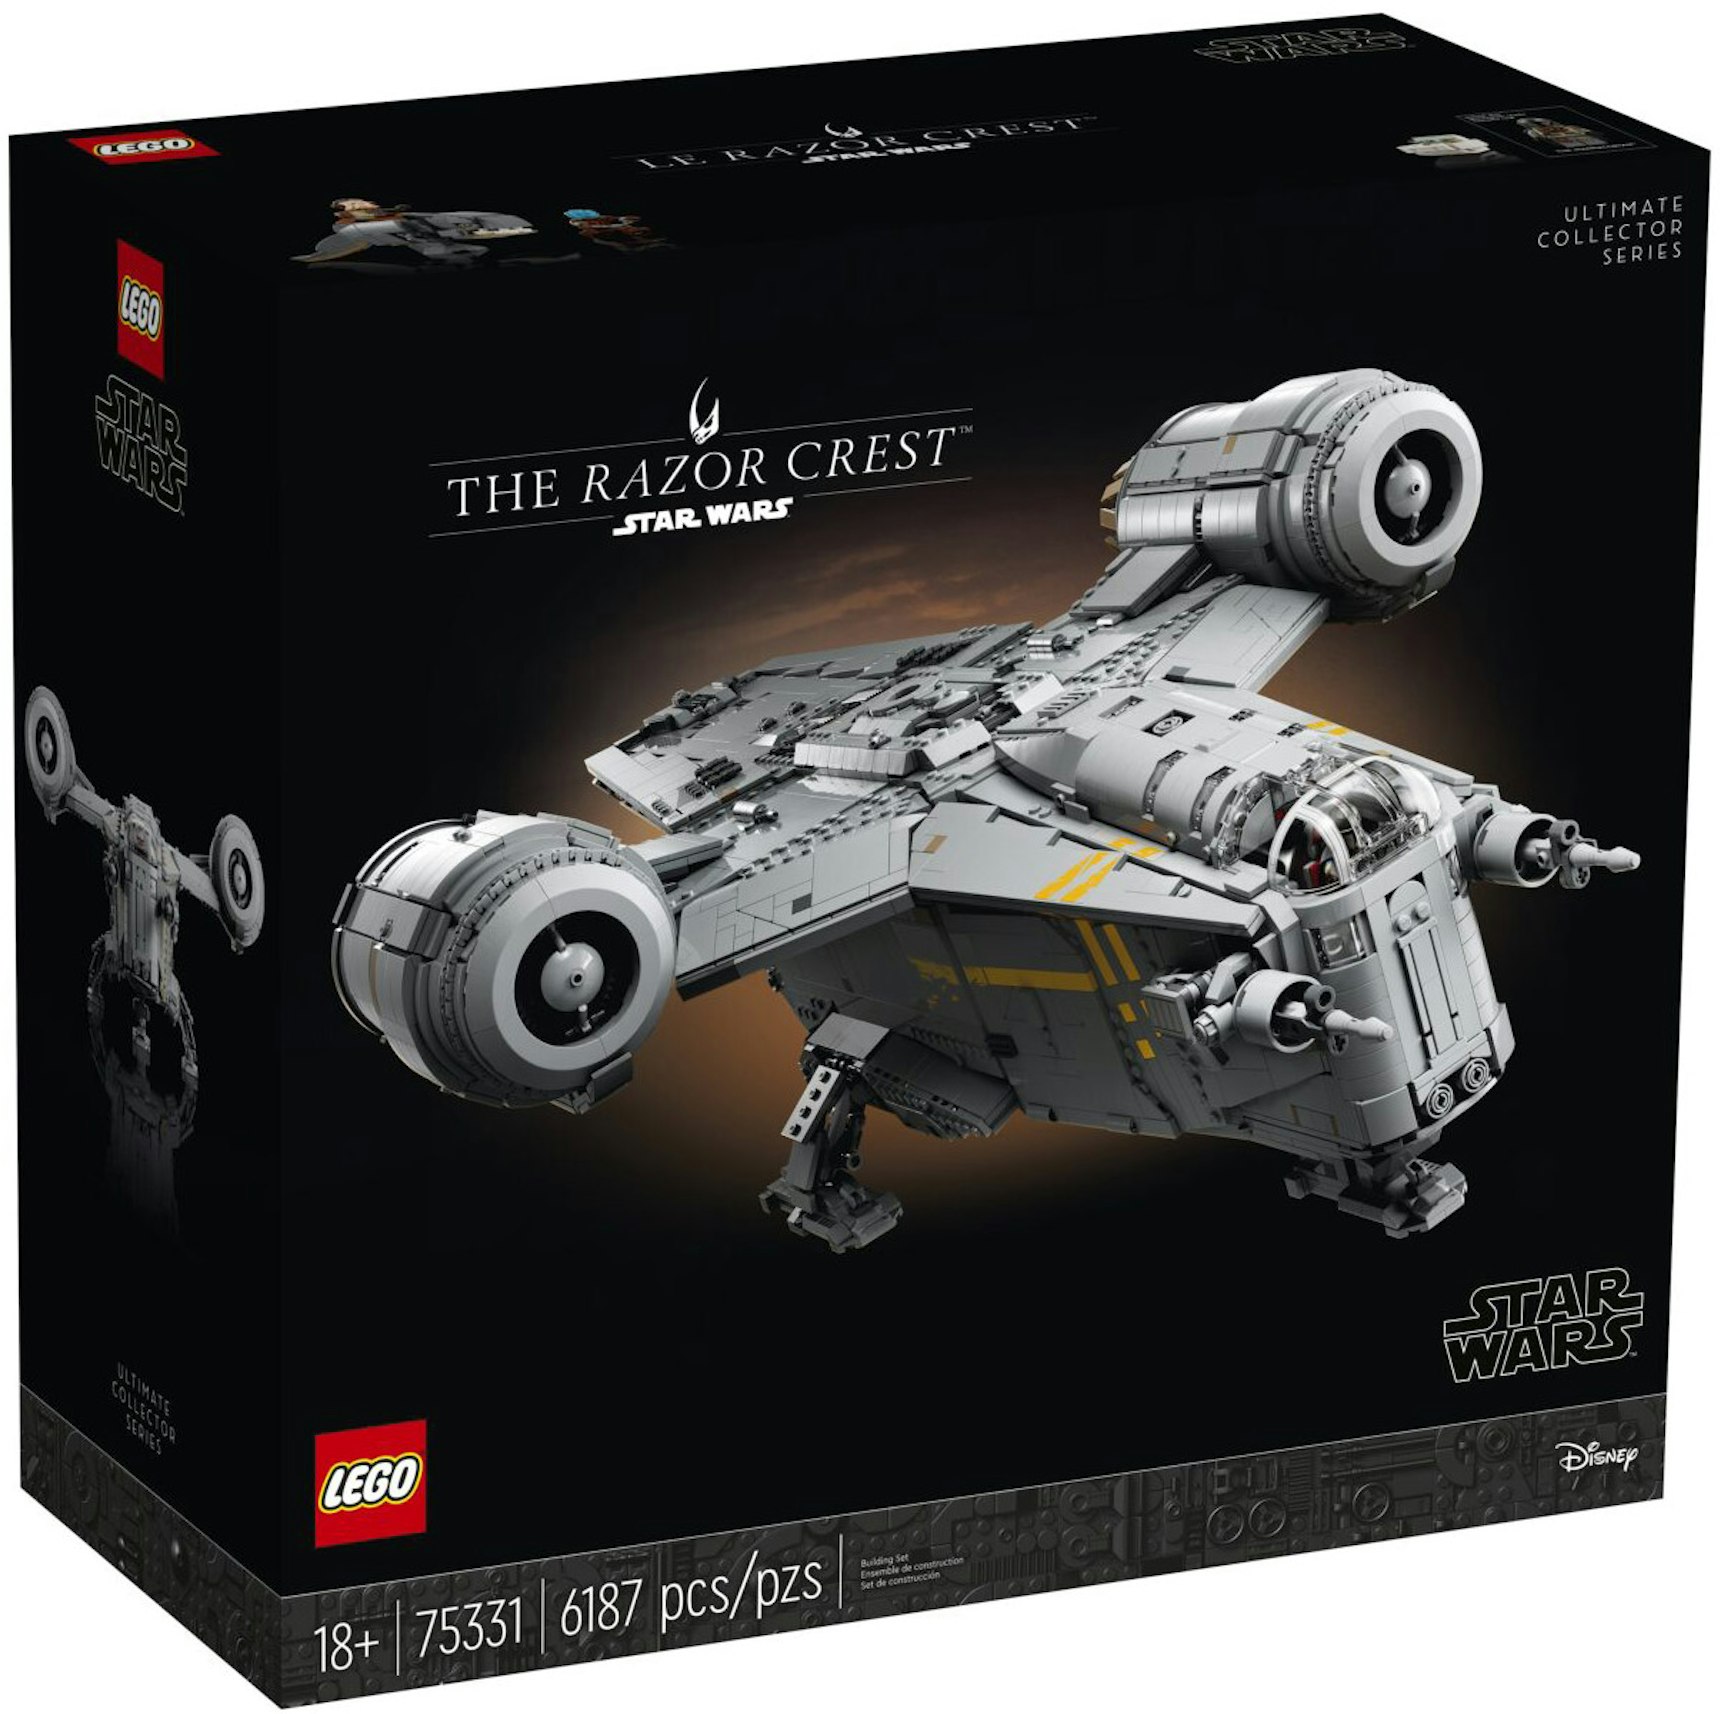 LEGO Star Wars Ultimate Collector Series The Crest US